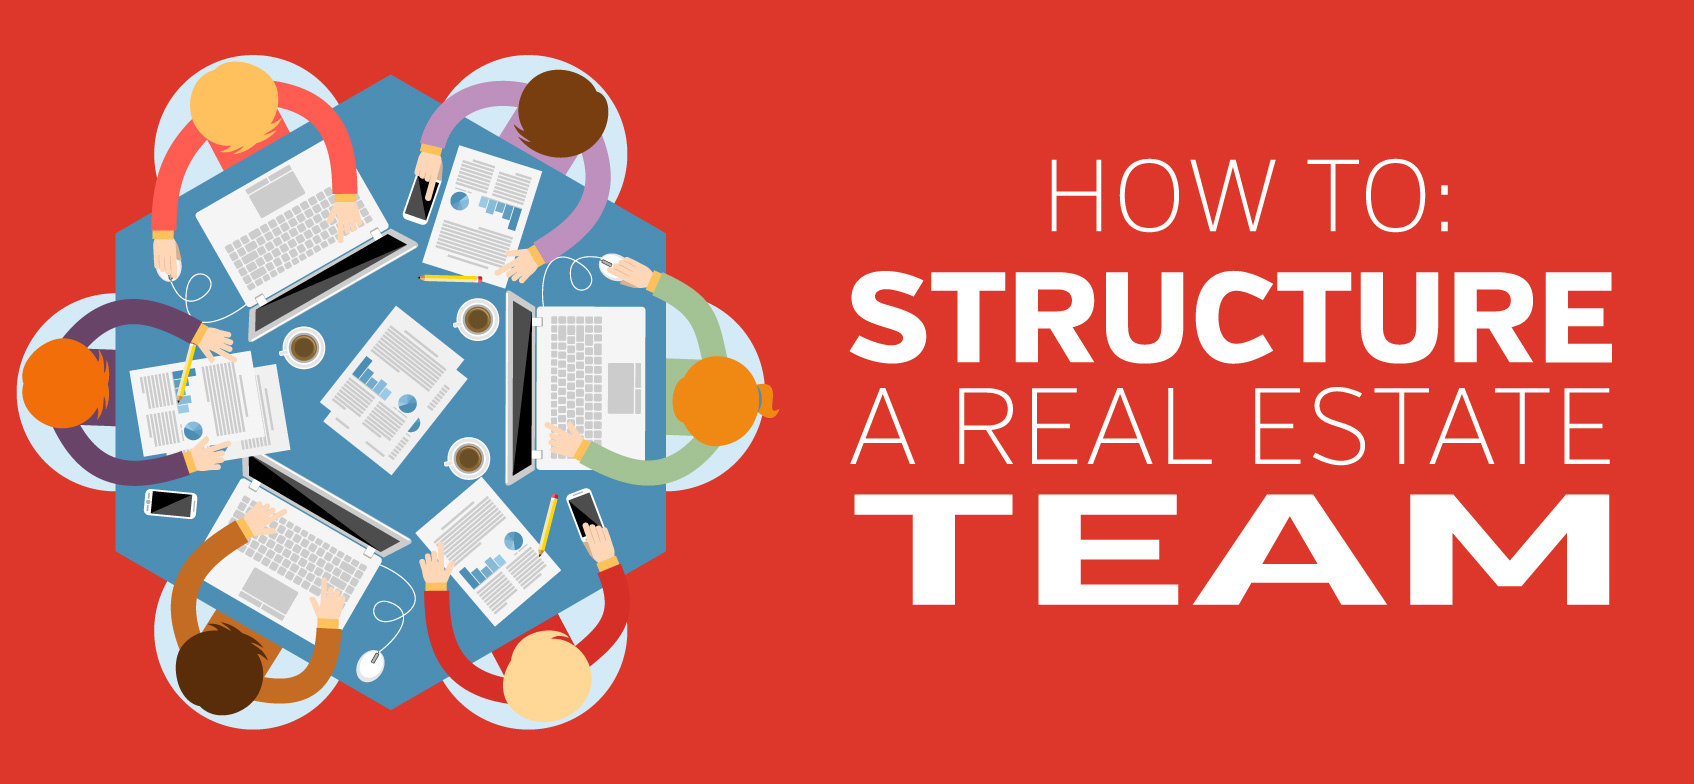 how-to-structure-real-estate-teams-and-split-commission